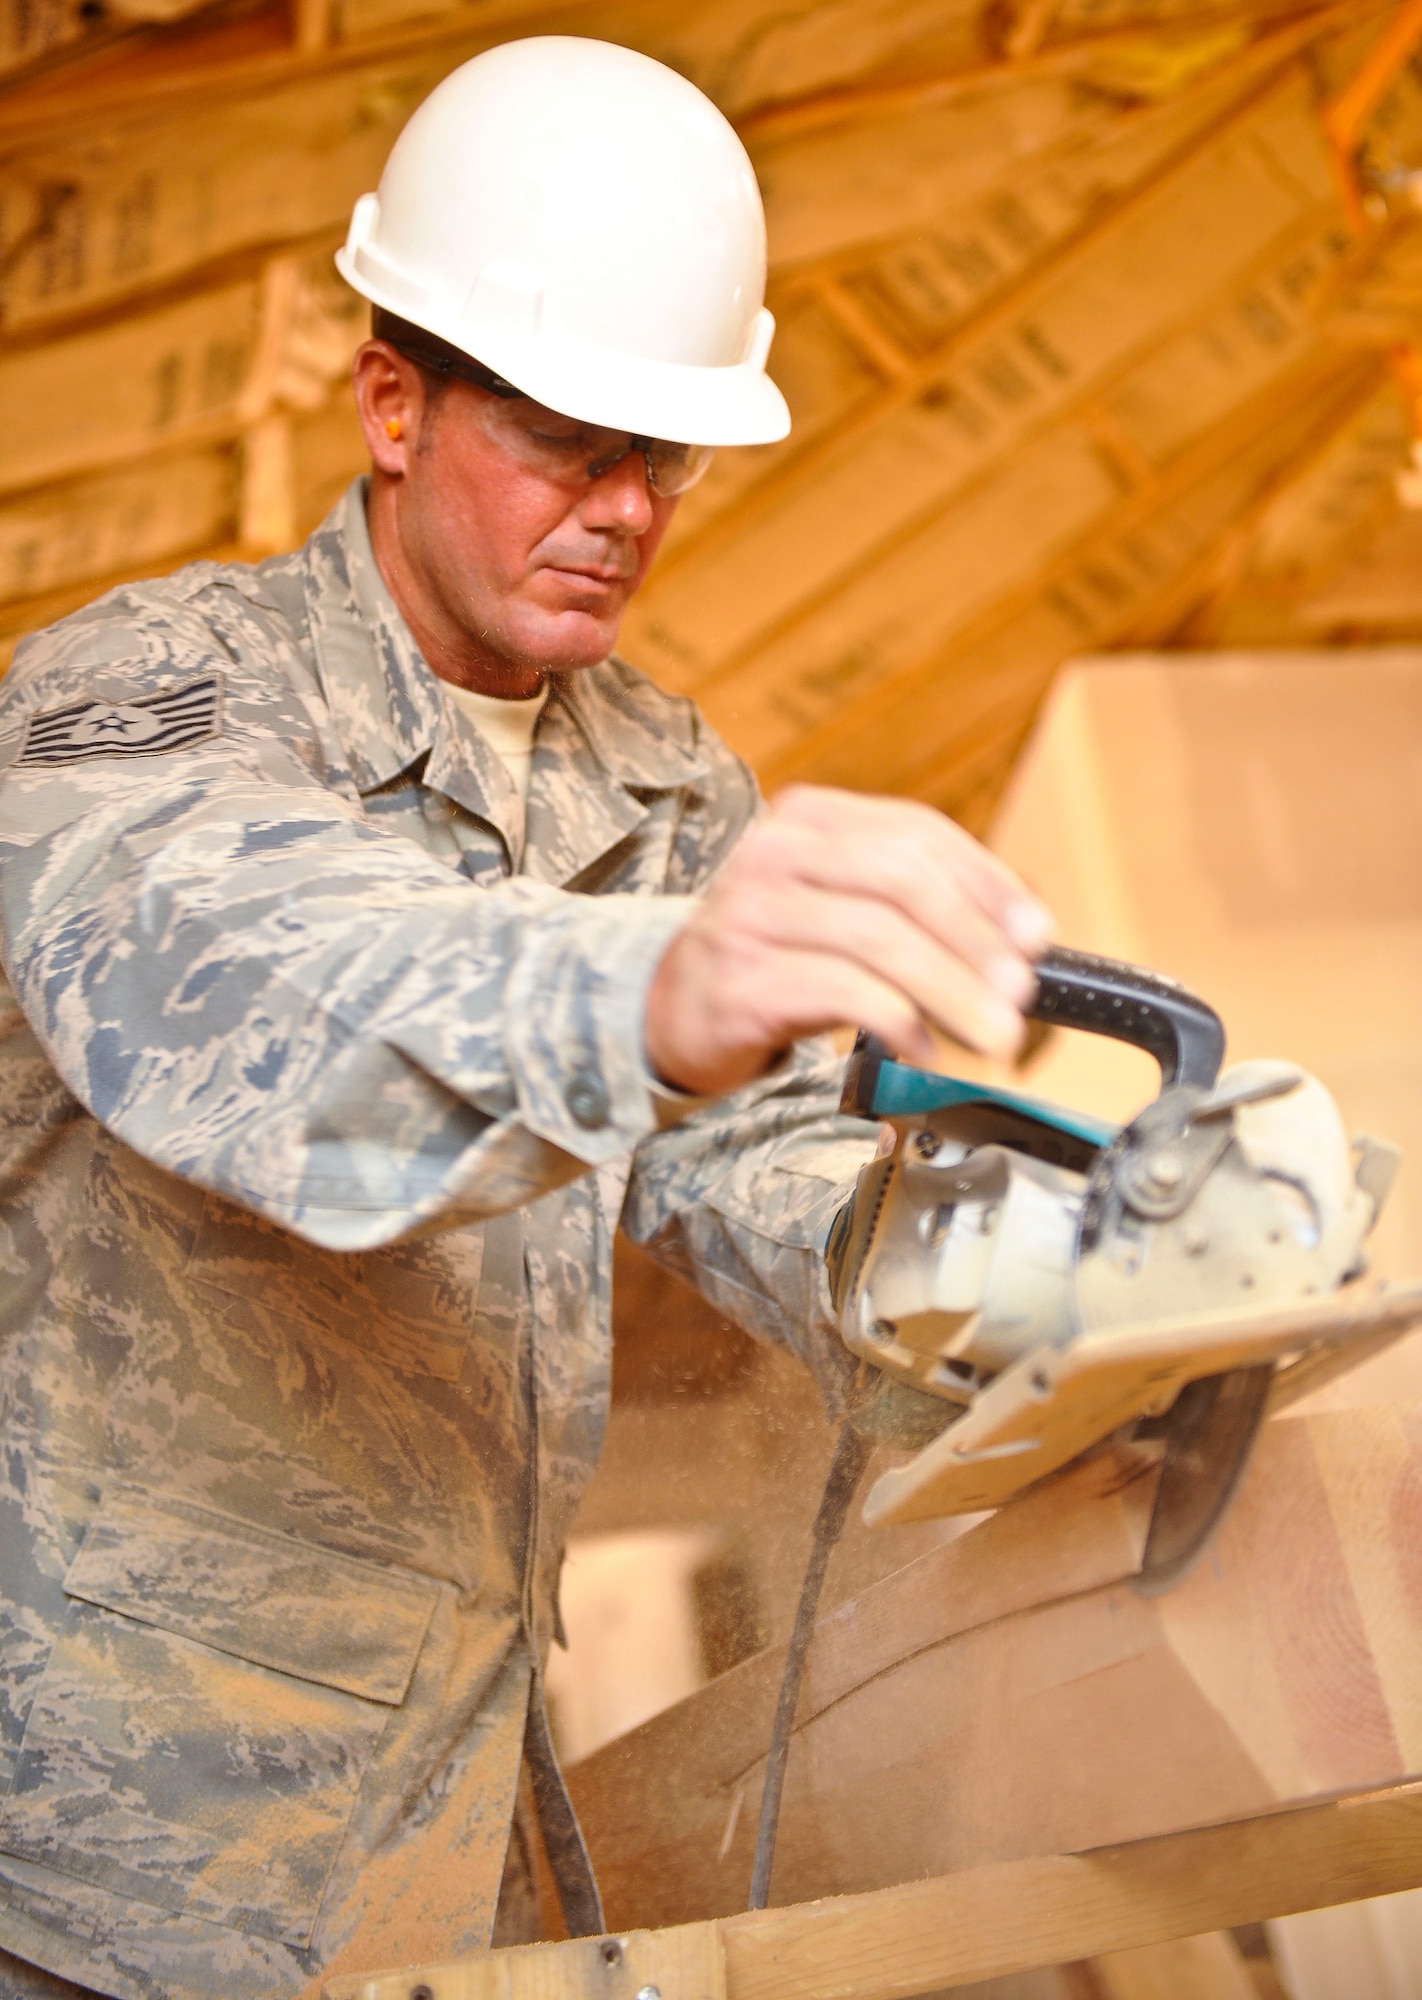 Tech. Sgt. Russell Hunt, 116th Civil Engineering Squadron, Robins Air Force Base, Ga., uses a circular saw to cut a ceiling beam for a renovation project at St. Michaels Association for Special Education, Window Rock, Ariz., June 6, 2011.  Hunt and more than 40 members of his squadron performed work for the Navajo Nation as a part of the Innovative Readiness Training program. (U.S. Air Force photo by Master Sgt. Roger Parsons/Released)